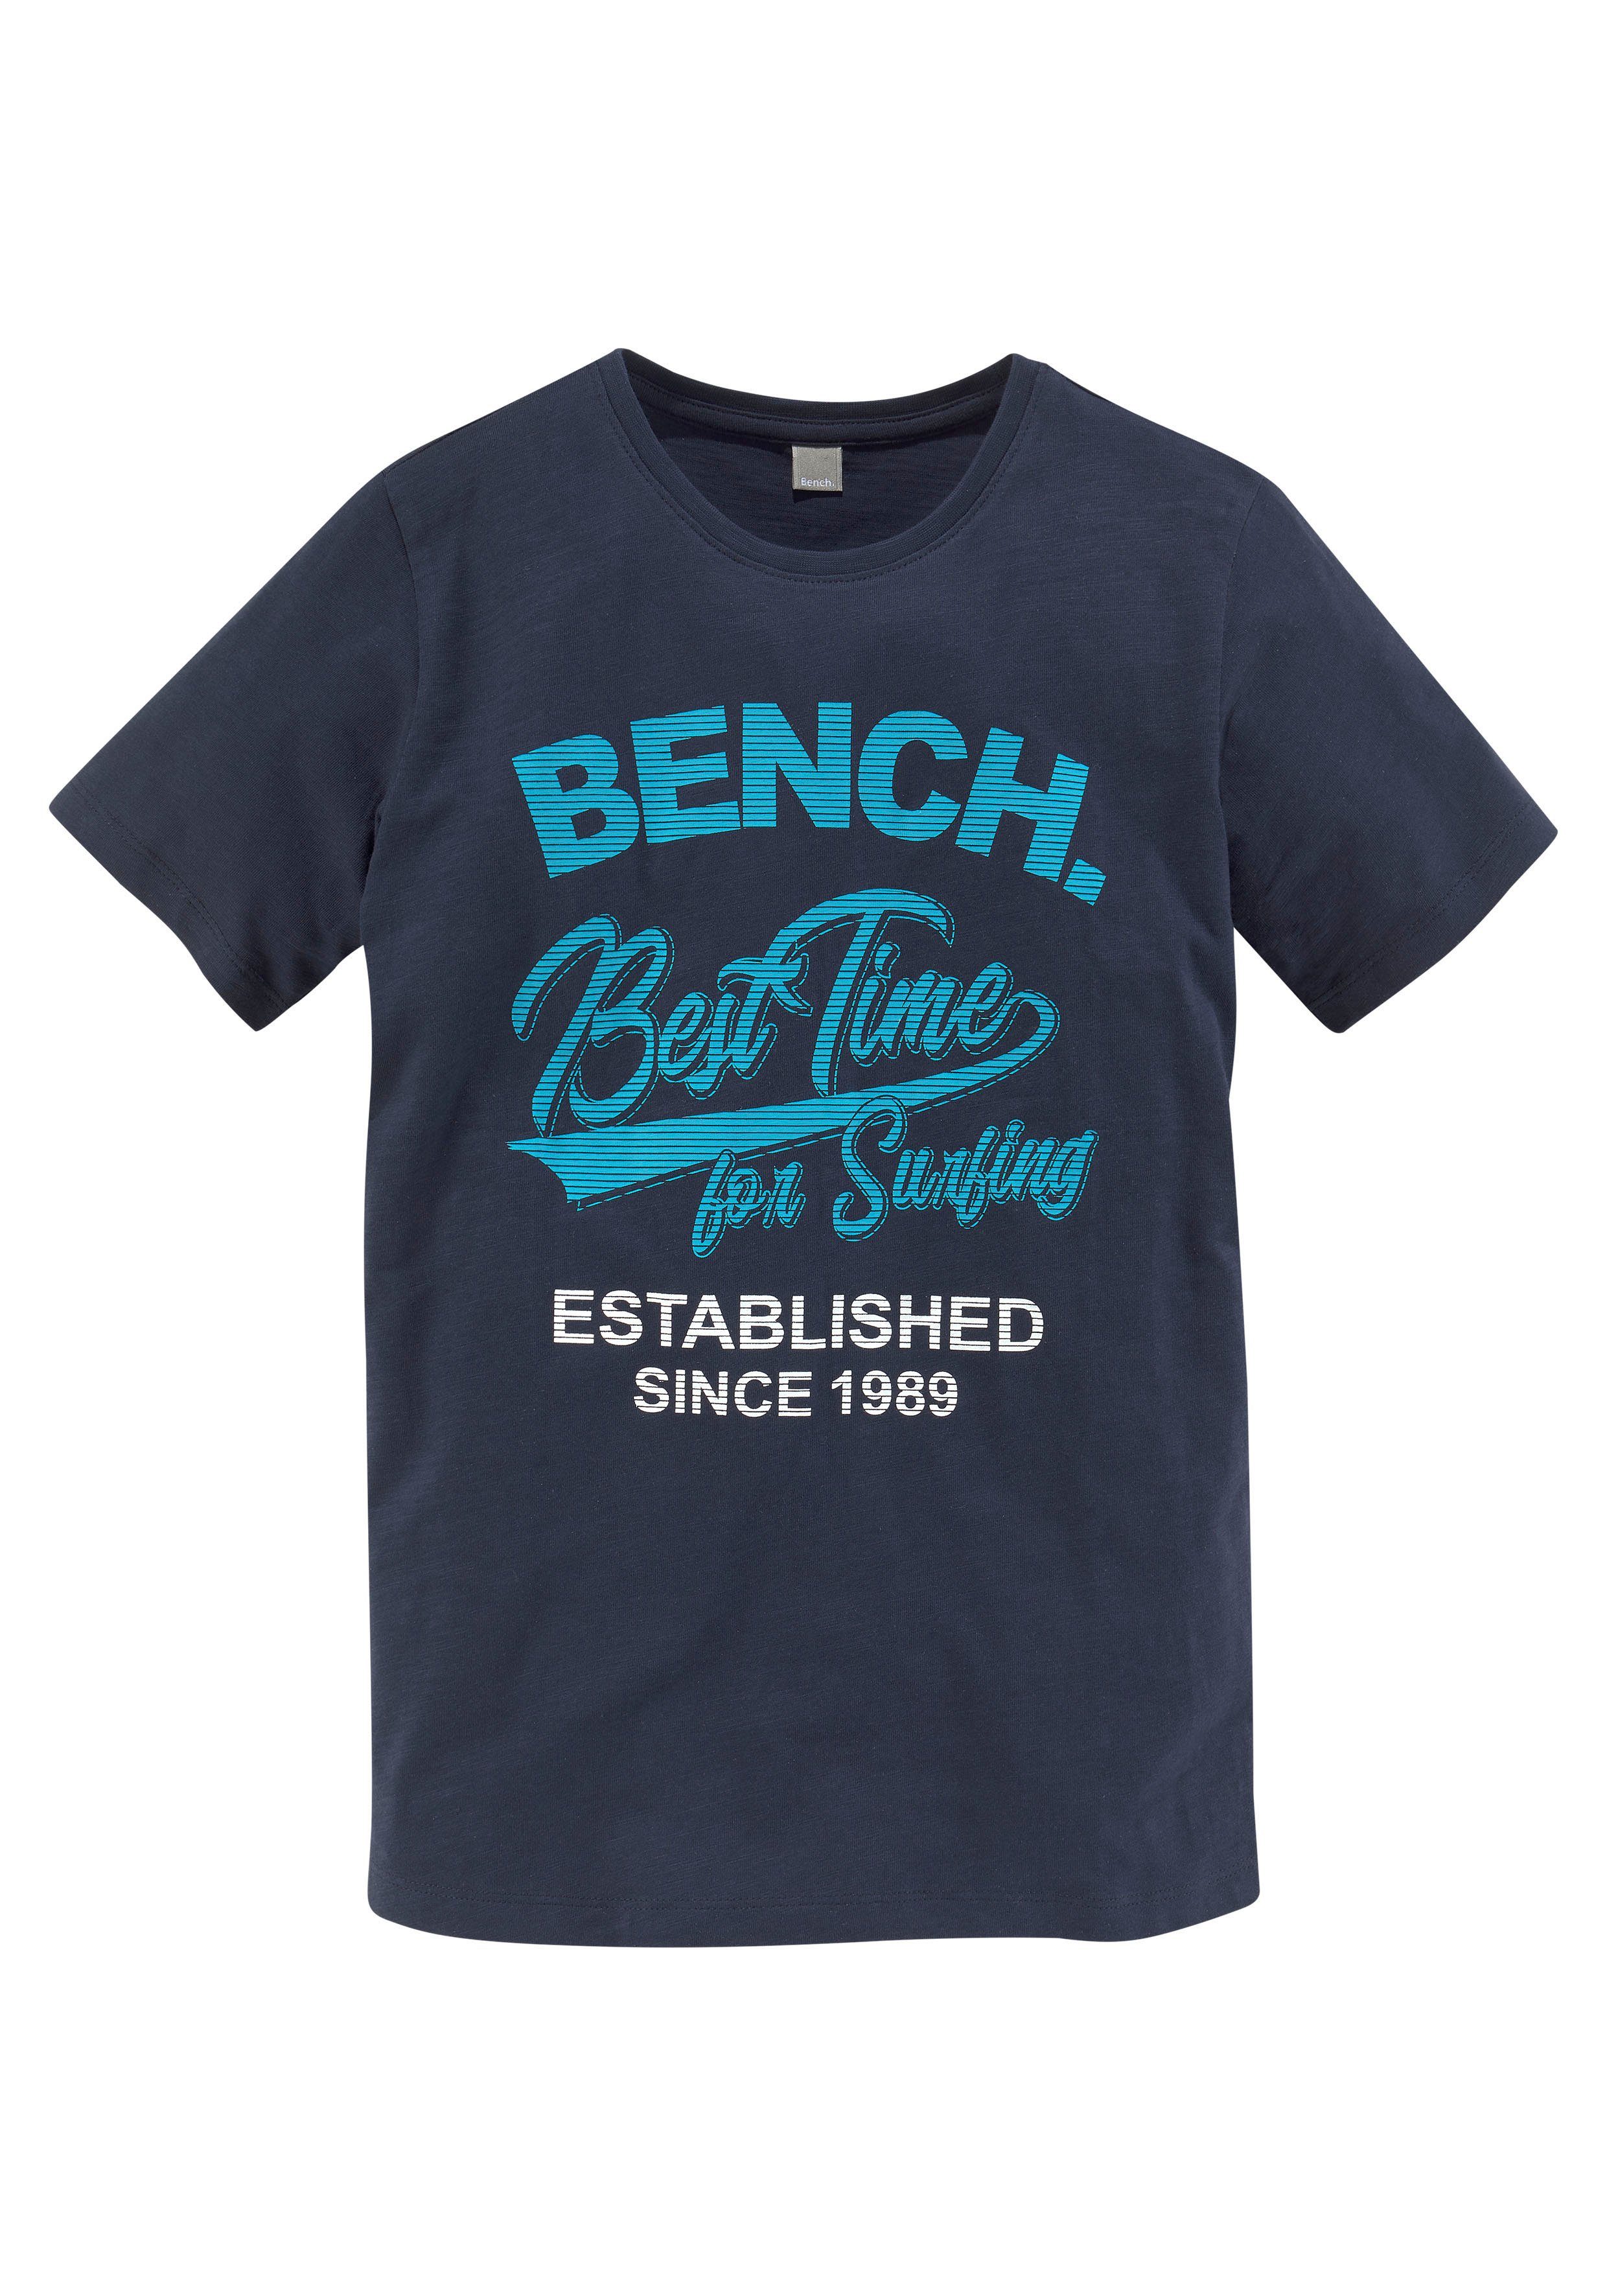 Bench. T-Shirt Best time surfing for